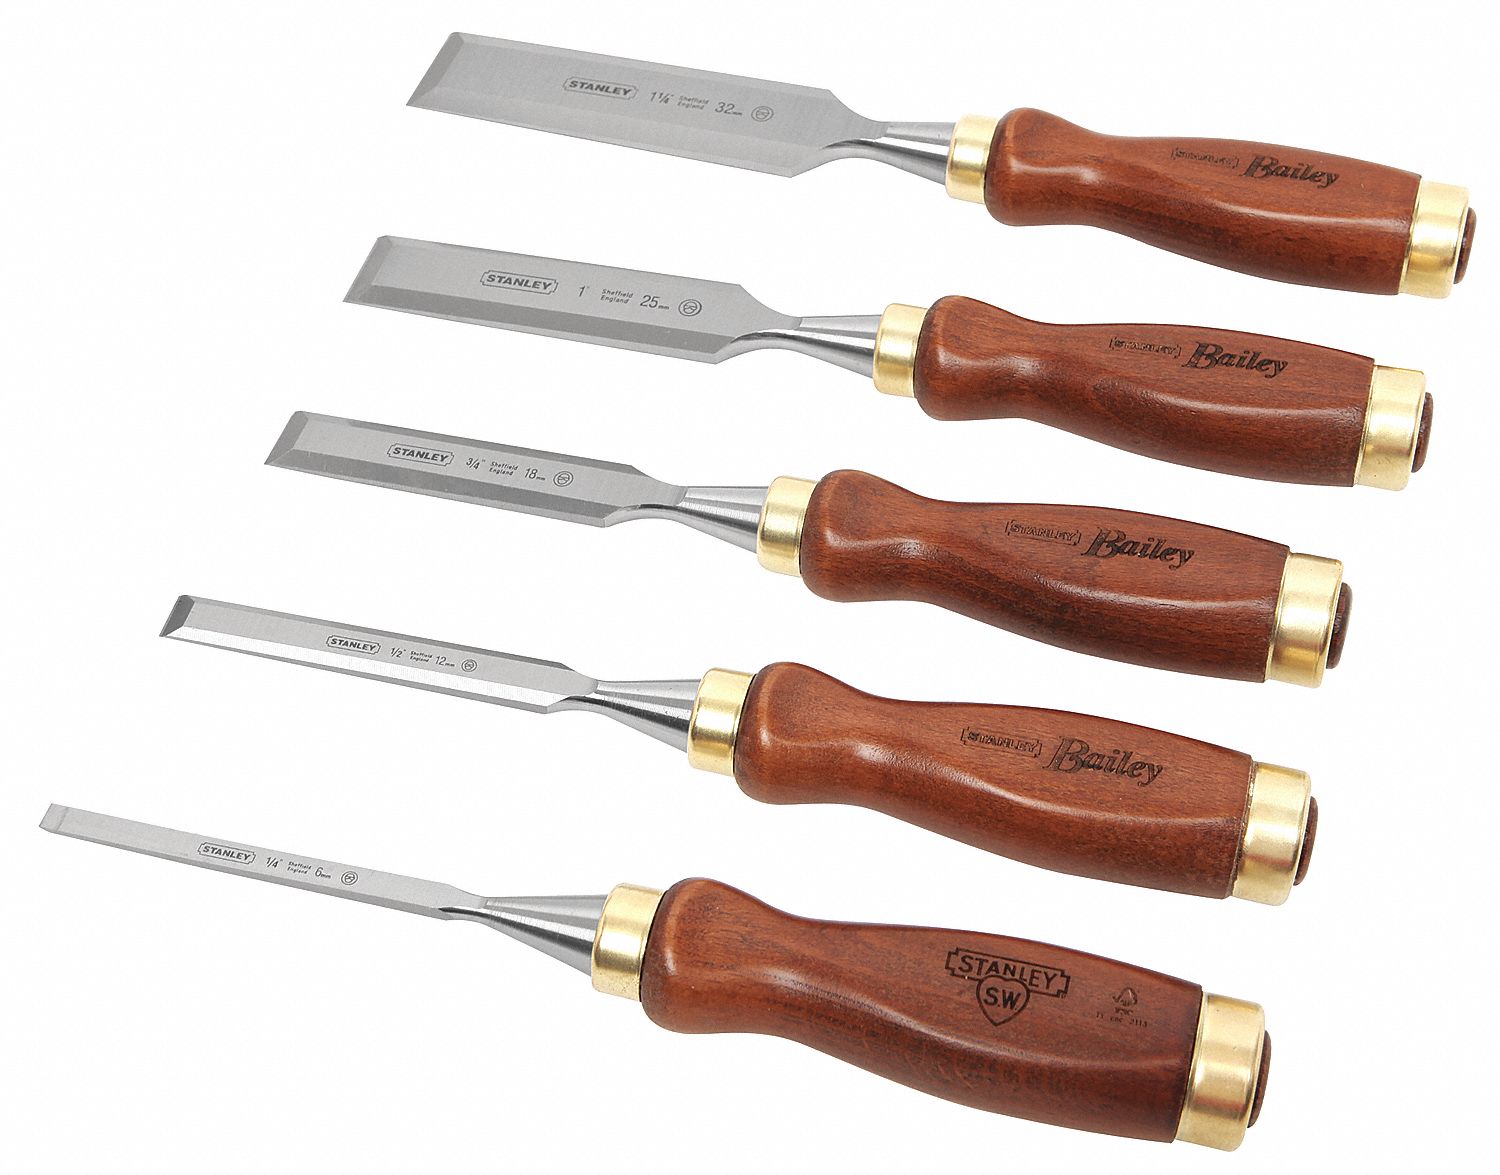 24N408 - Bailey Chisel Set 1/4 to 1-1/4 In 5 Pc